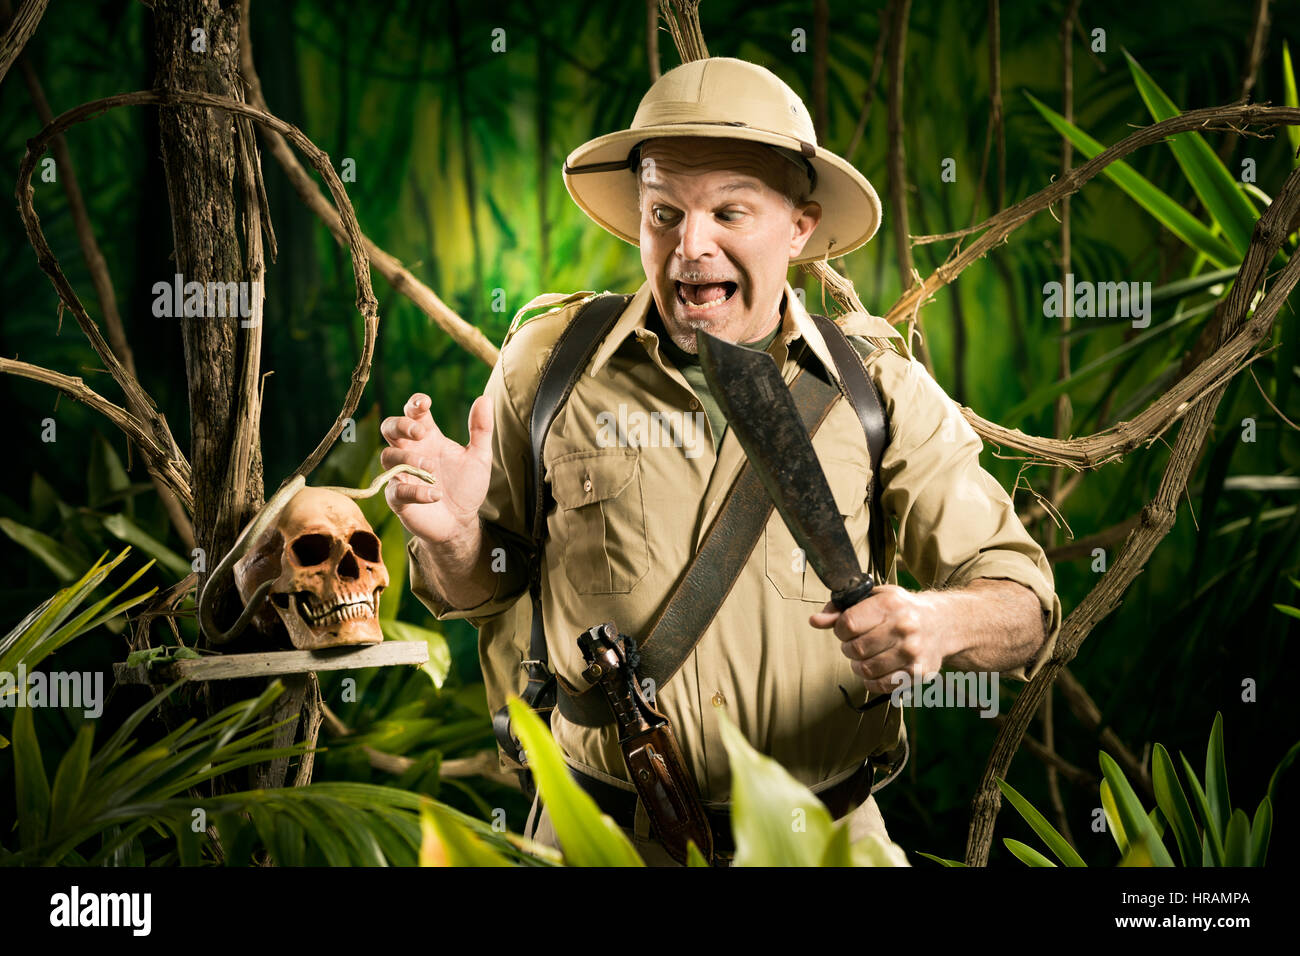 Shocked adventurer finding a human skull in the jungle with retro colonial style equipment. Stock Photo